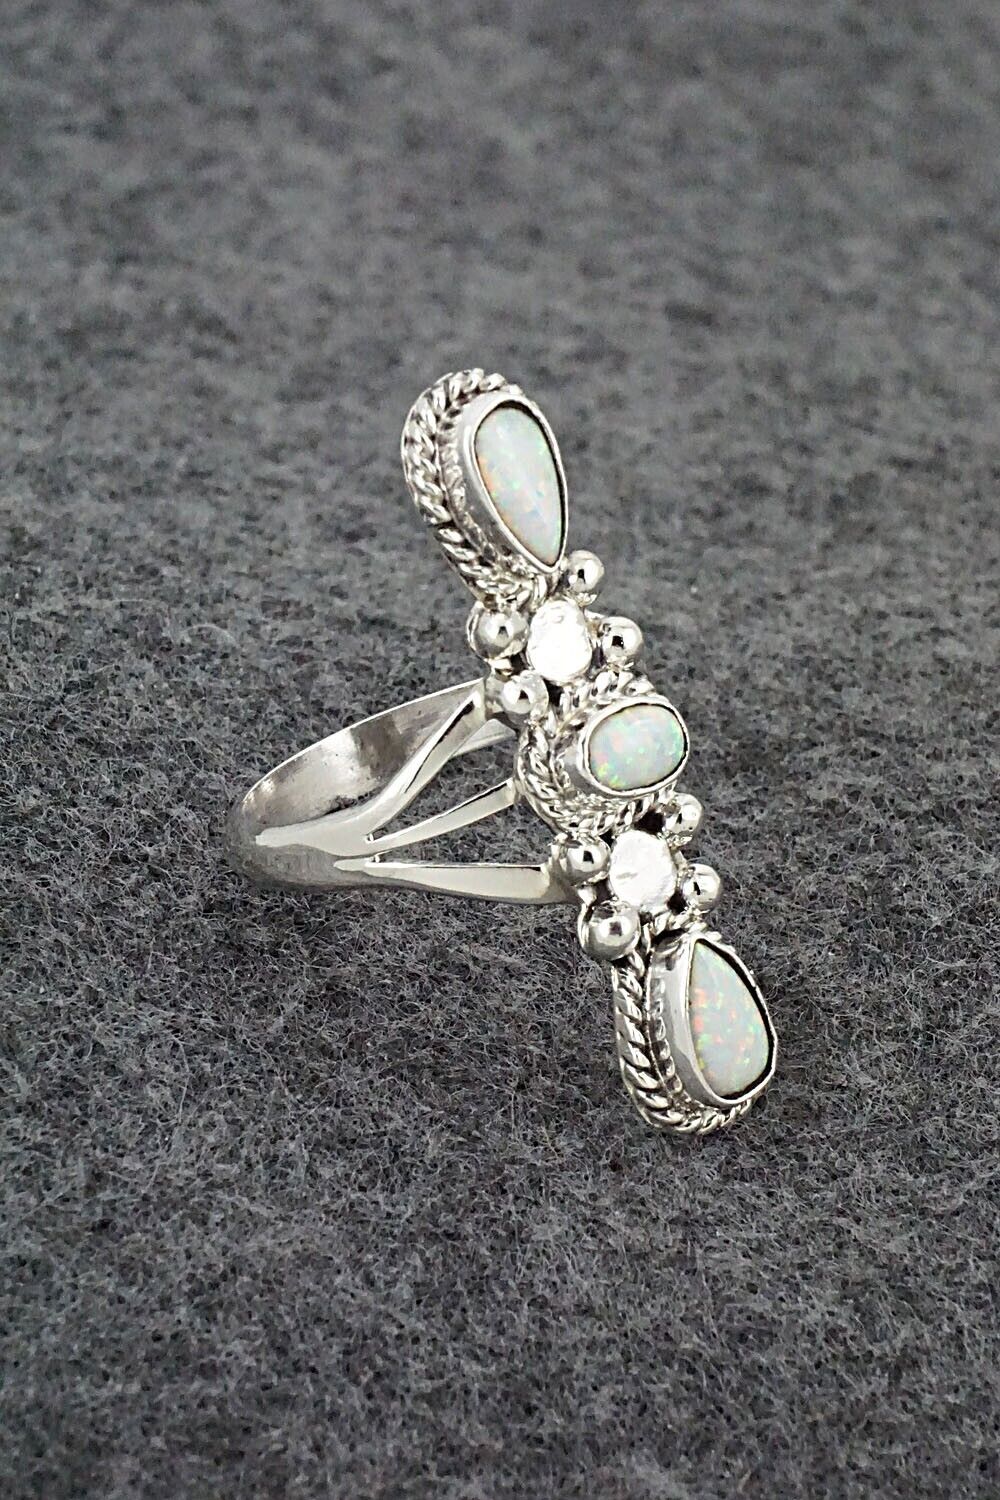 Opalite & Sterling Silver Ring - Andrew Vandever - Size 8.75